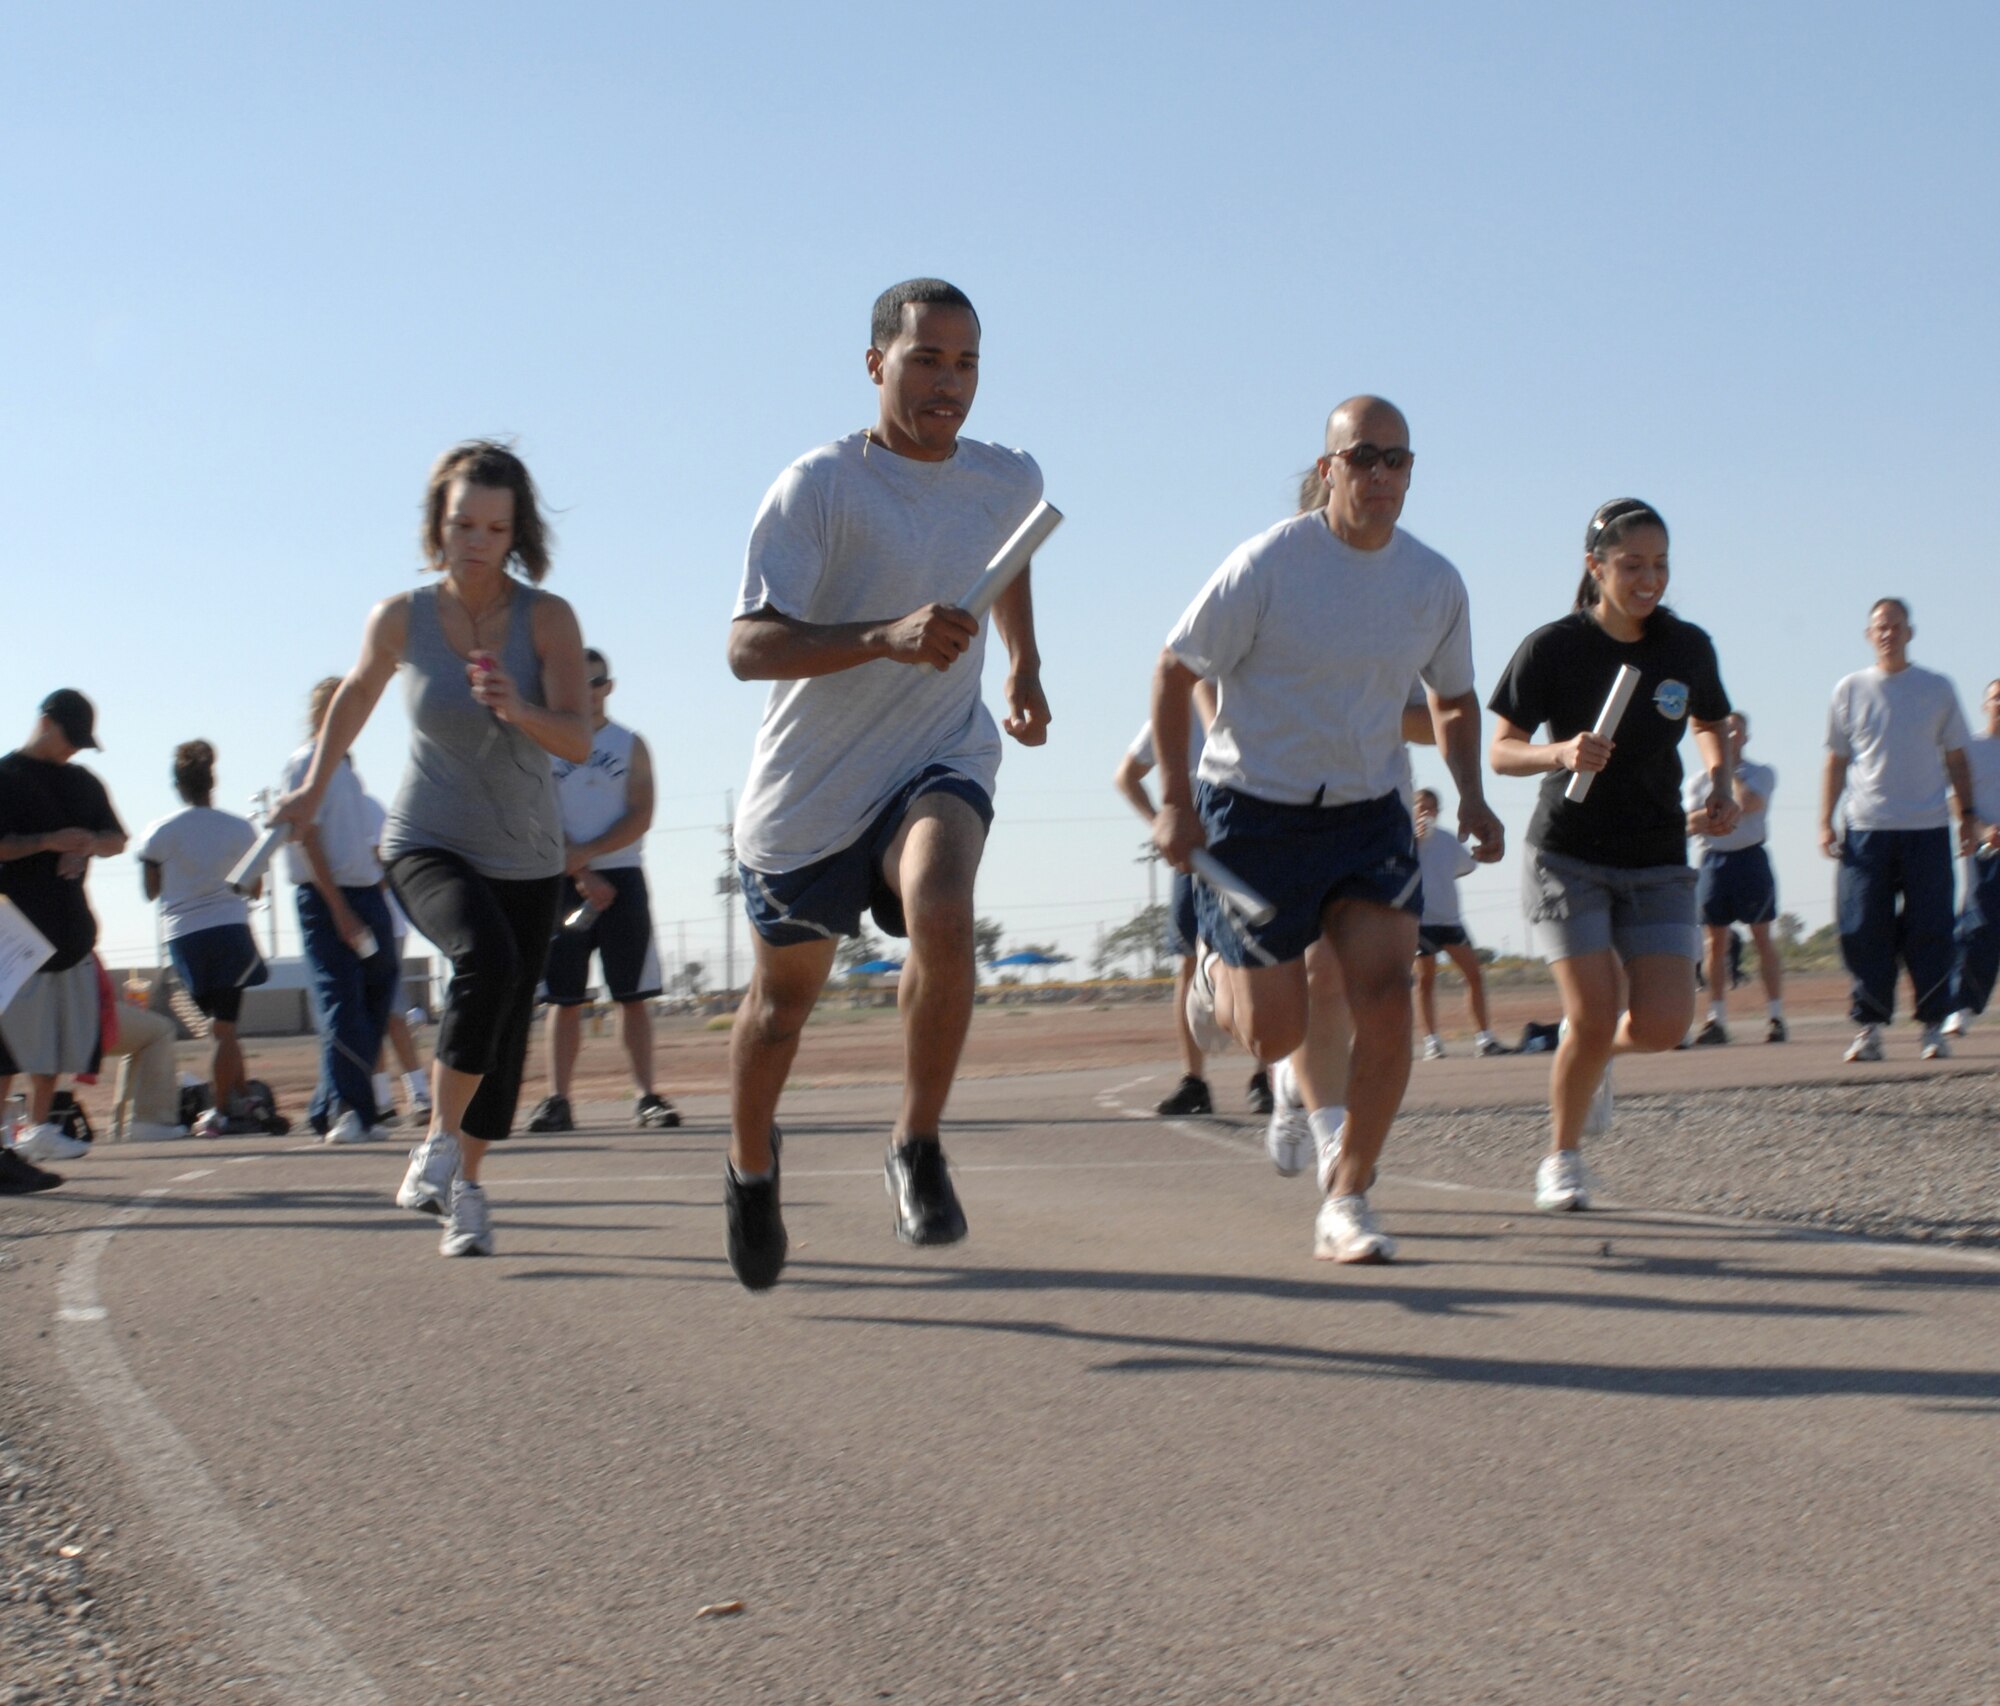 Five members of the small squadron category begin to run their portion of the three-mile relay during Sports Day at Holloman Air Force Base, N.M., October 10. Each member of the three-person team ran one mile with a baton before handing it off to the next person. (U.S. Air Force photo/Airman Sondra M. Escutia)